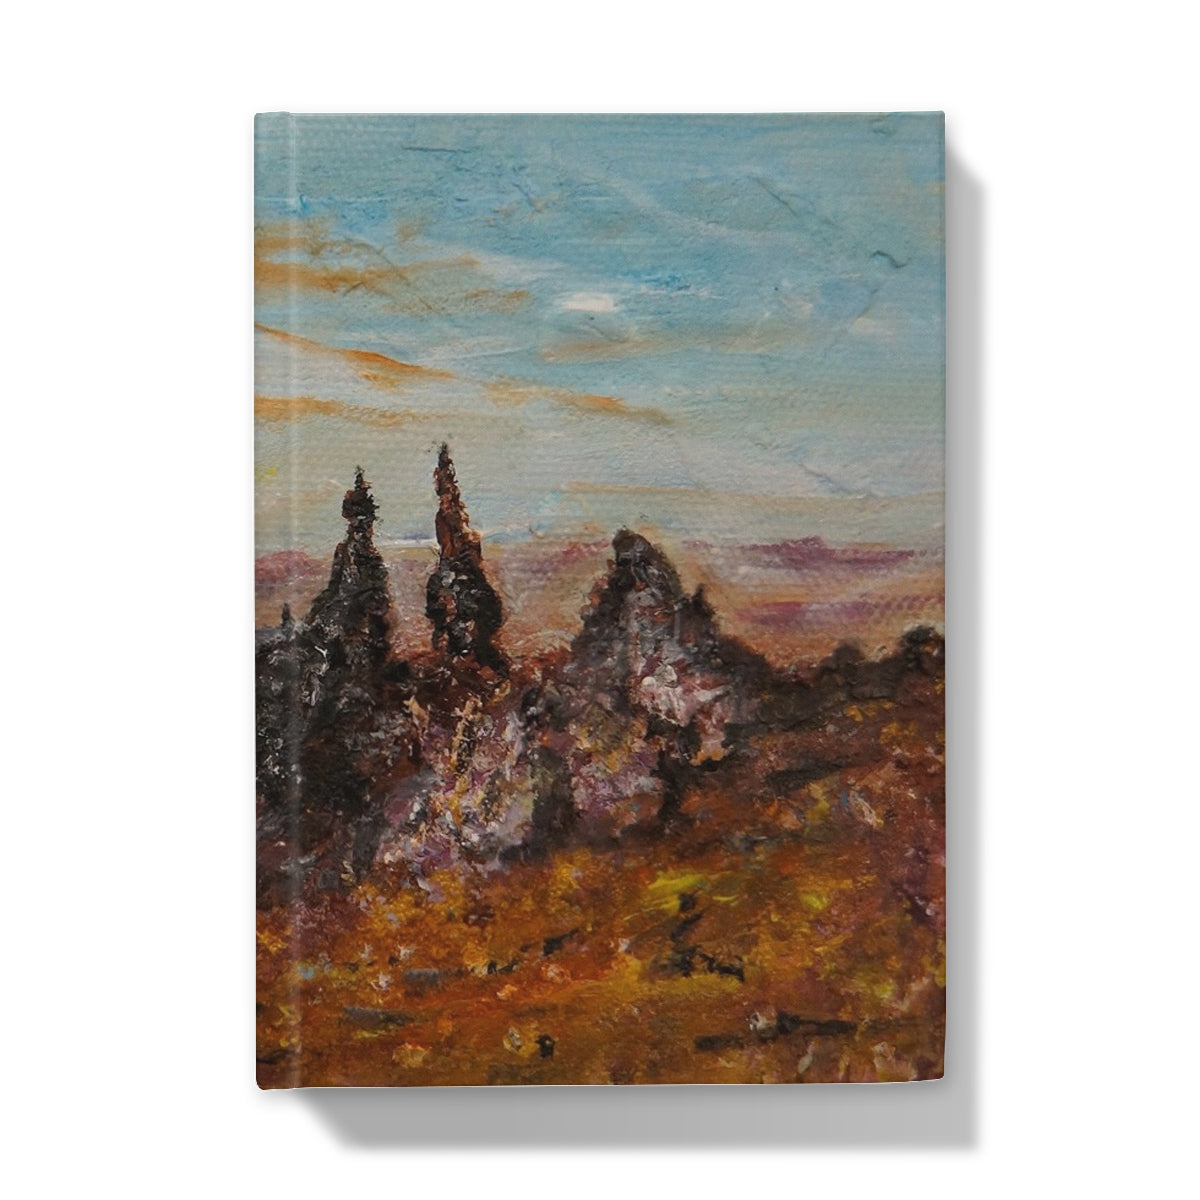 The Old Man Of Storr Skye Art Gifts Hardback Journal-Journals & Notebooks-Skye Art Gallery-A4-Lined-Paintings, Prints, Homeware, Art Gifts From Scotland By Scottish Artist Kevin Hunter